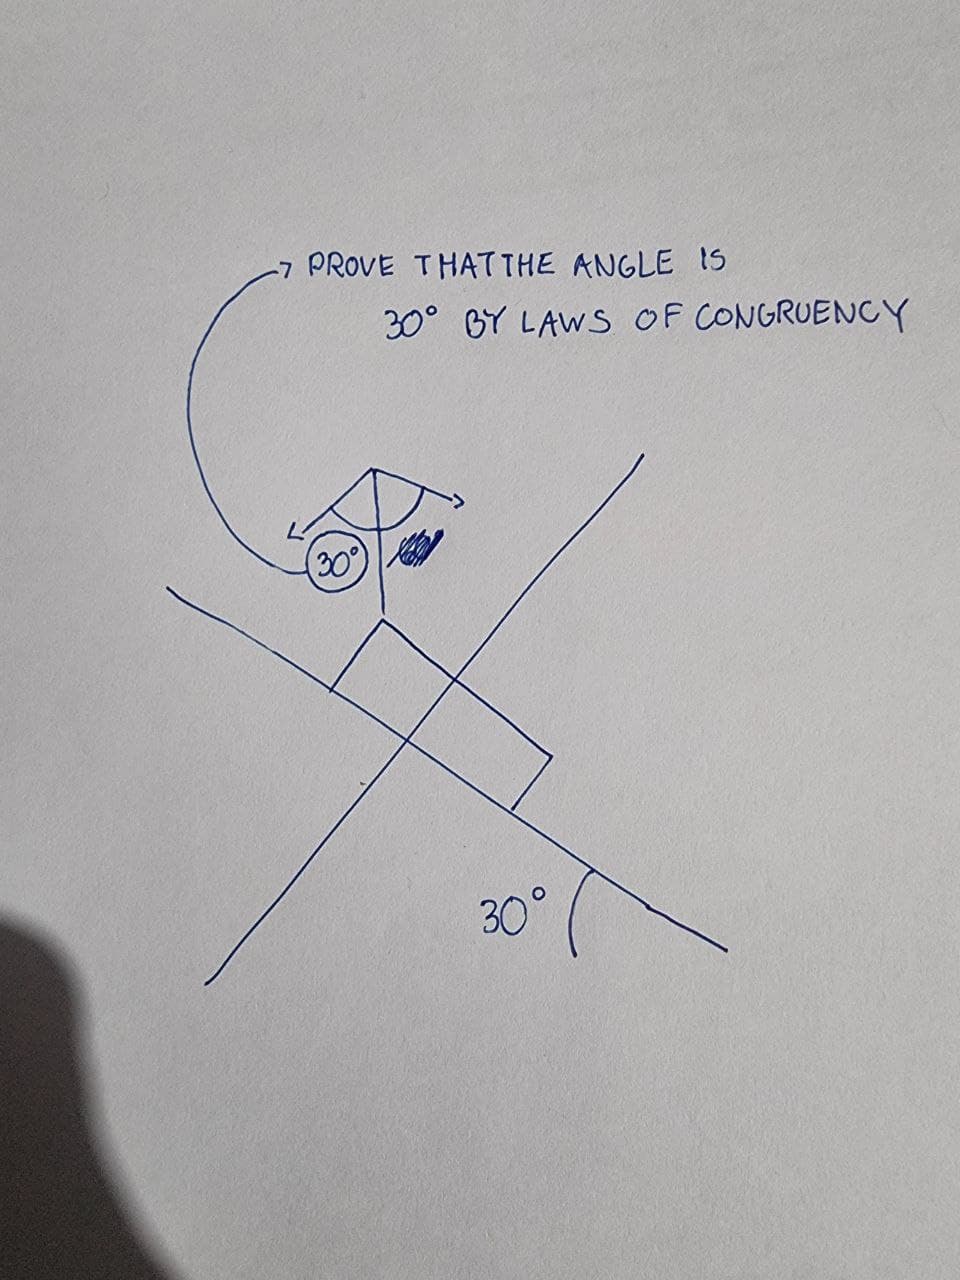 -7 PROVE THAT THE ANGLE 15
(30°)
30° BY LAWS OF CONGRUENCY
毫
30°